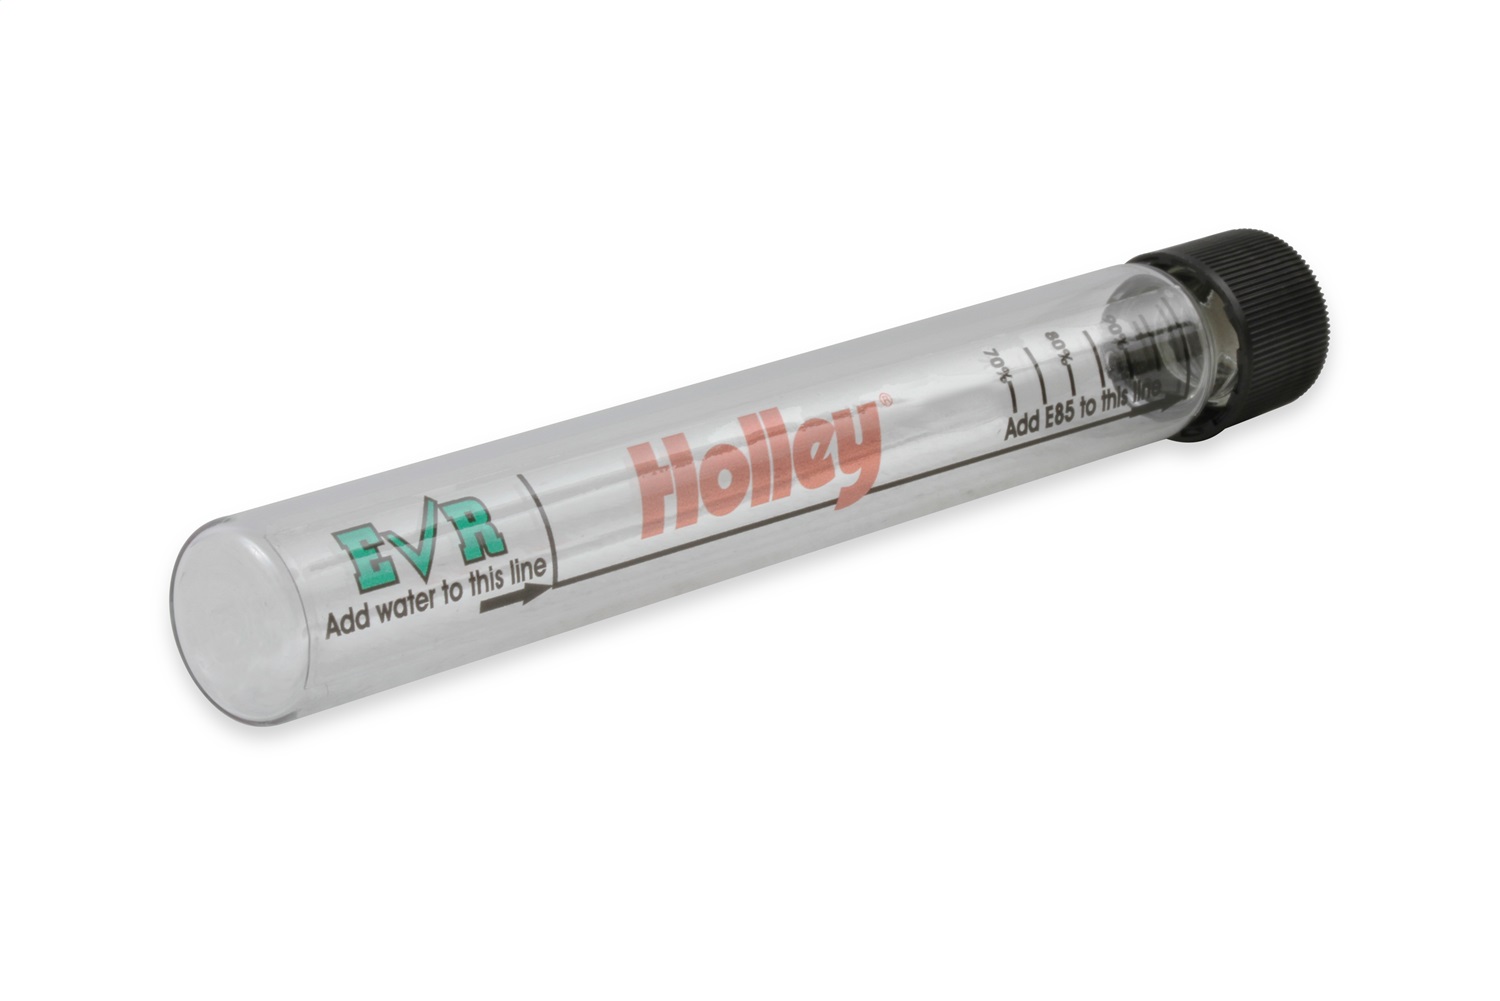 Holley 26-147 Fuel Tester